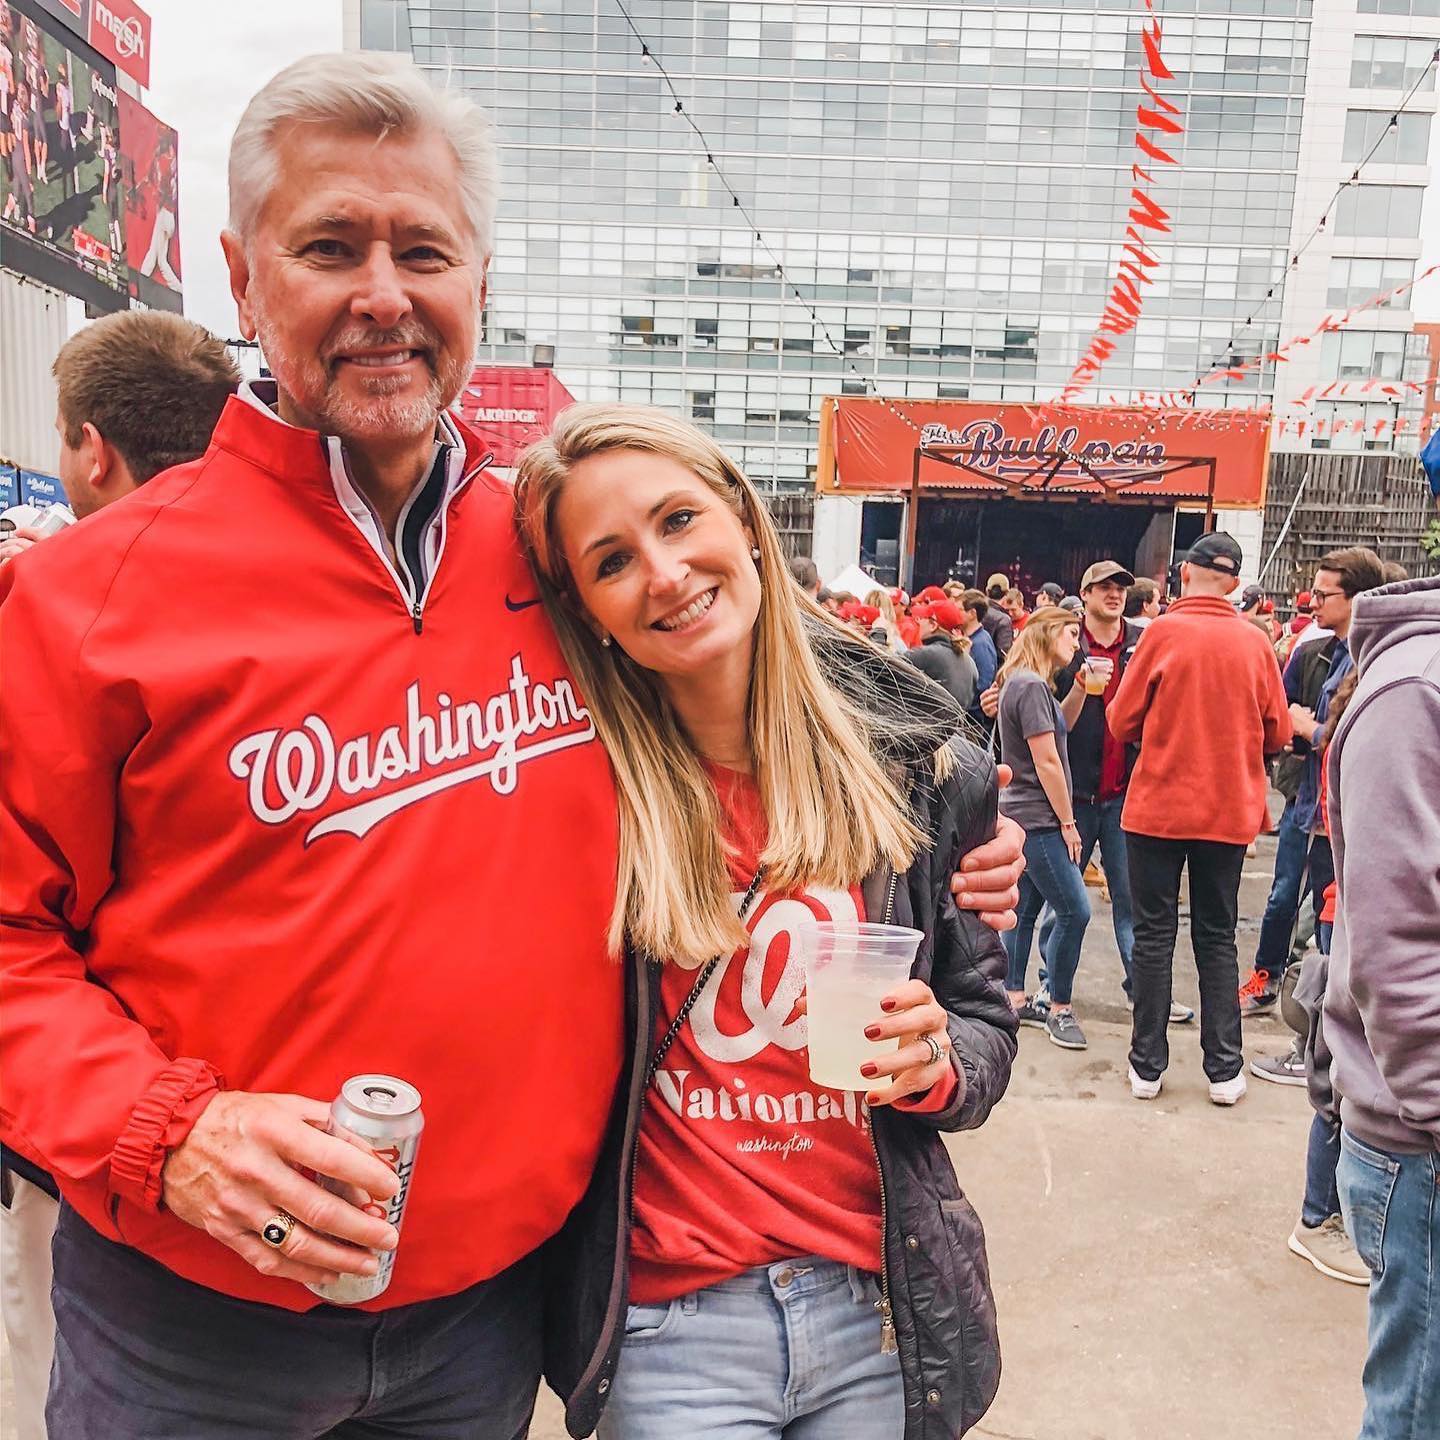 Washington Nationals offer virtual game day options for fans